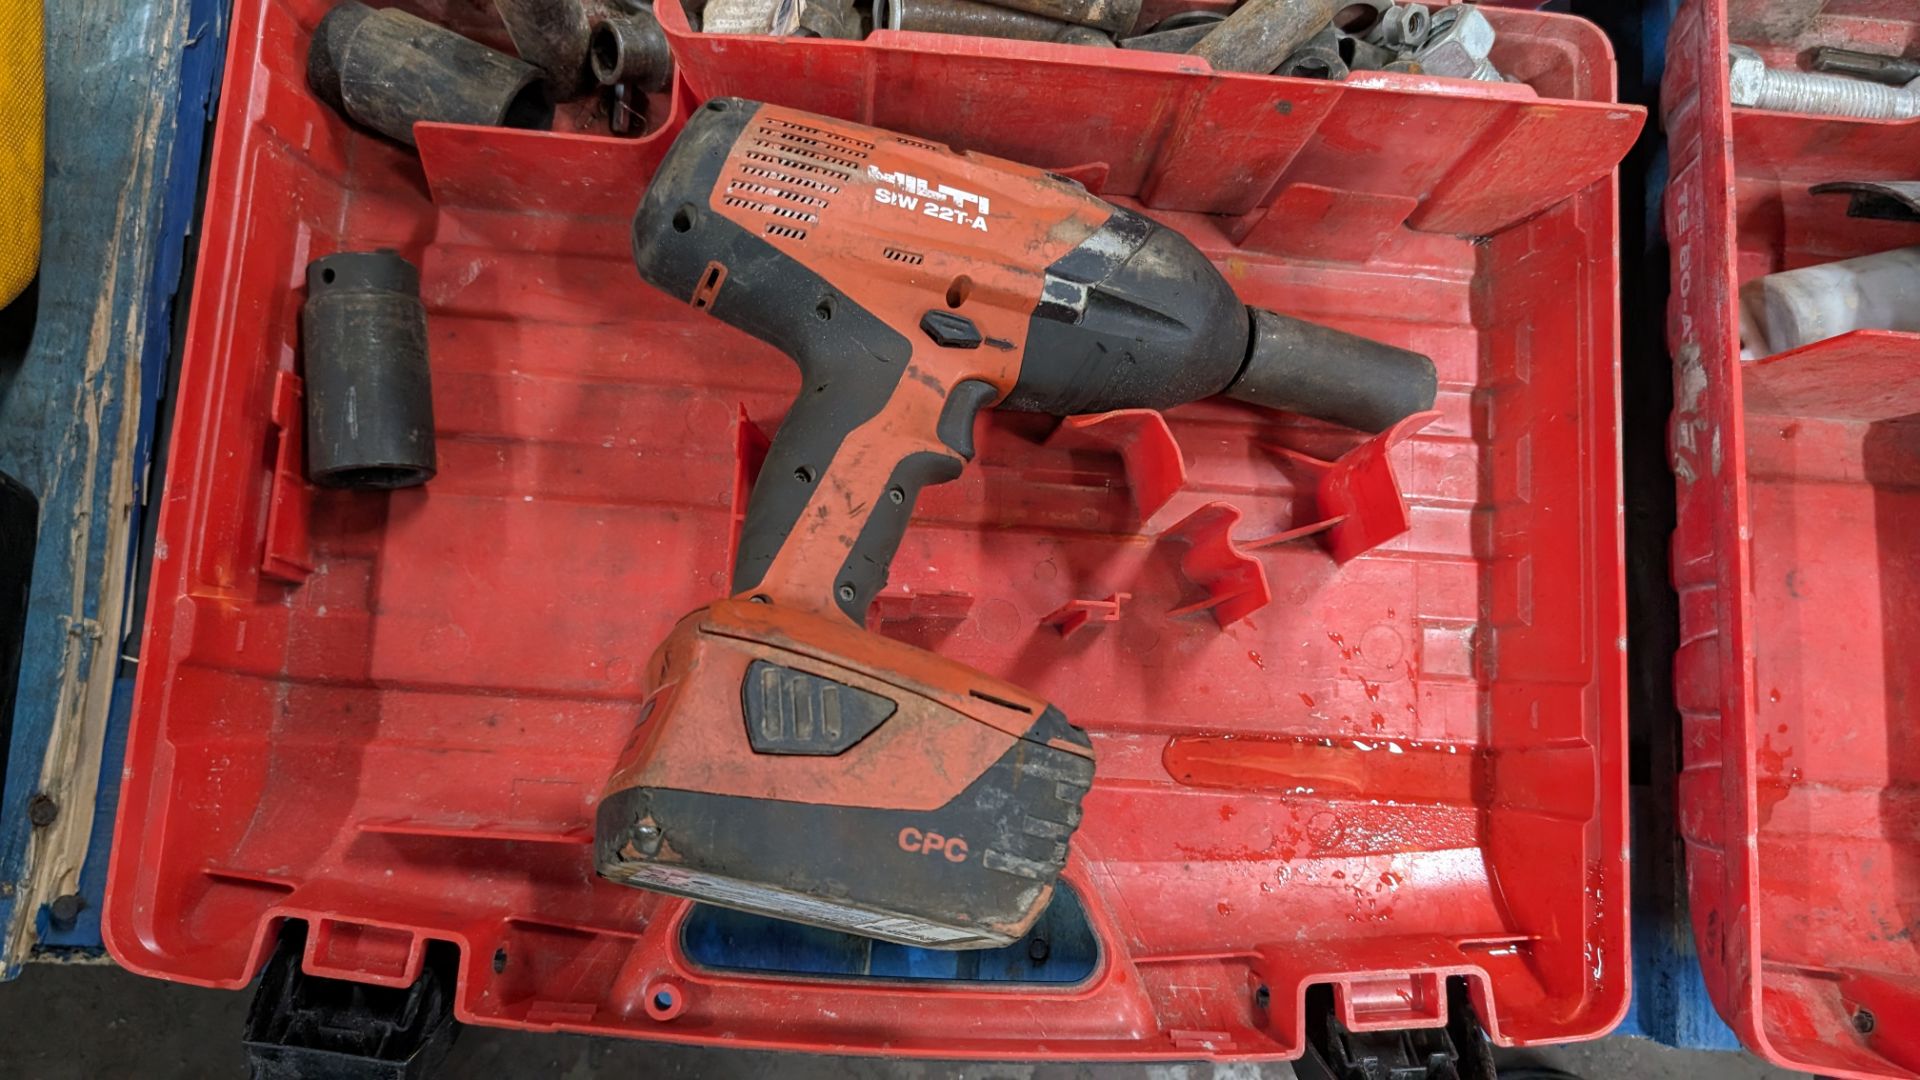 Hilti model SIW22T-A cordless drill including 21.6V battery plus assorted sockets for use with same - Image 5 of 7